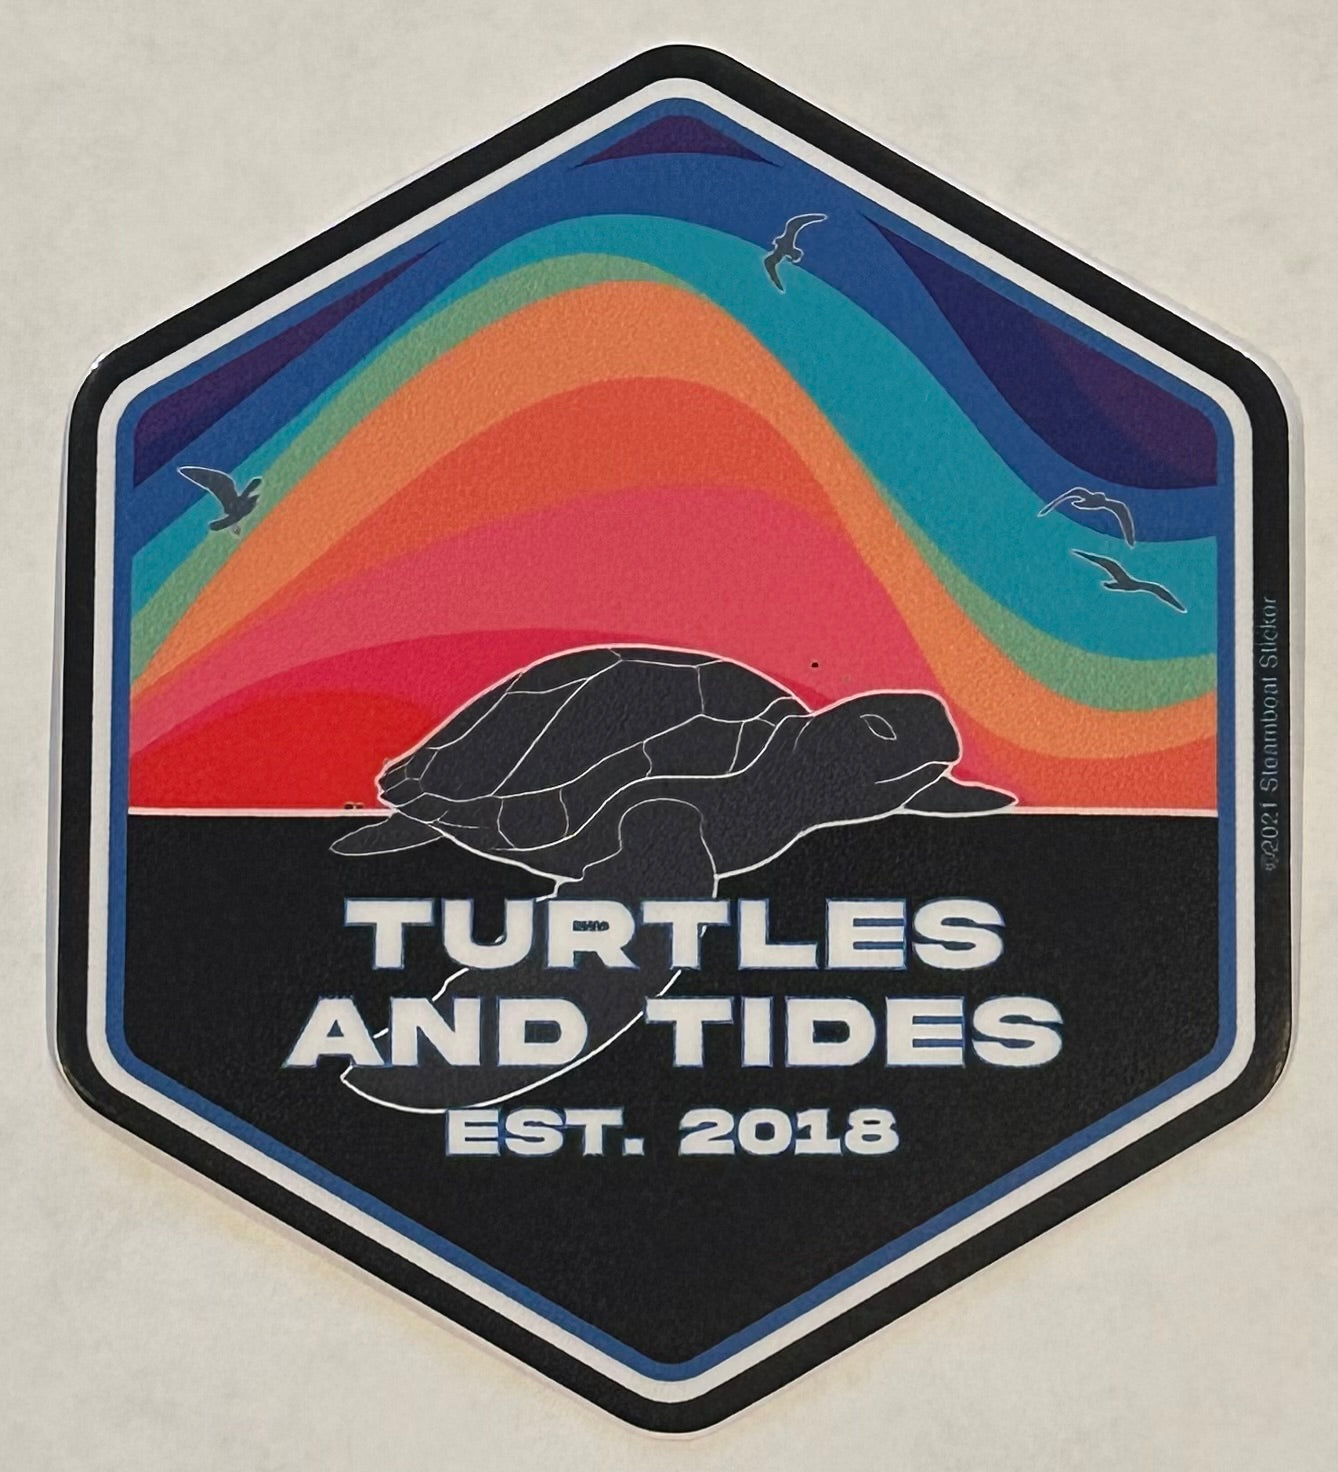 NEW! Northern Lights Turtle Sticker - Turtles and Tides 